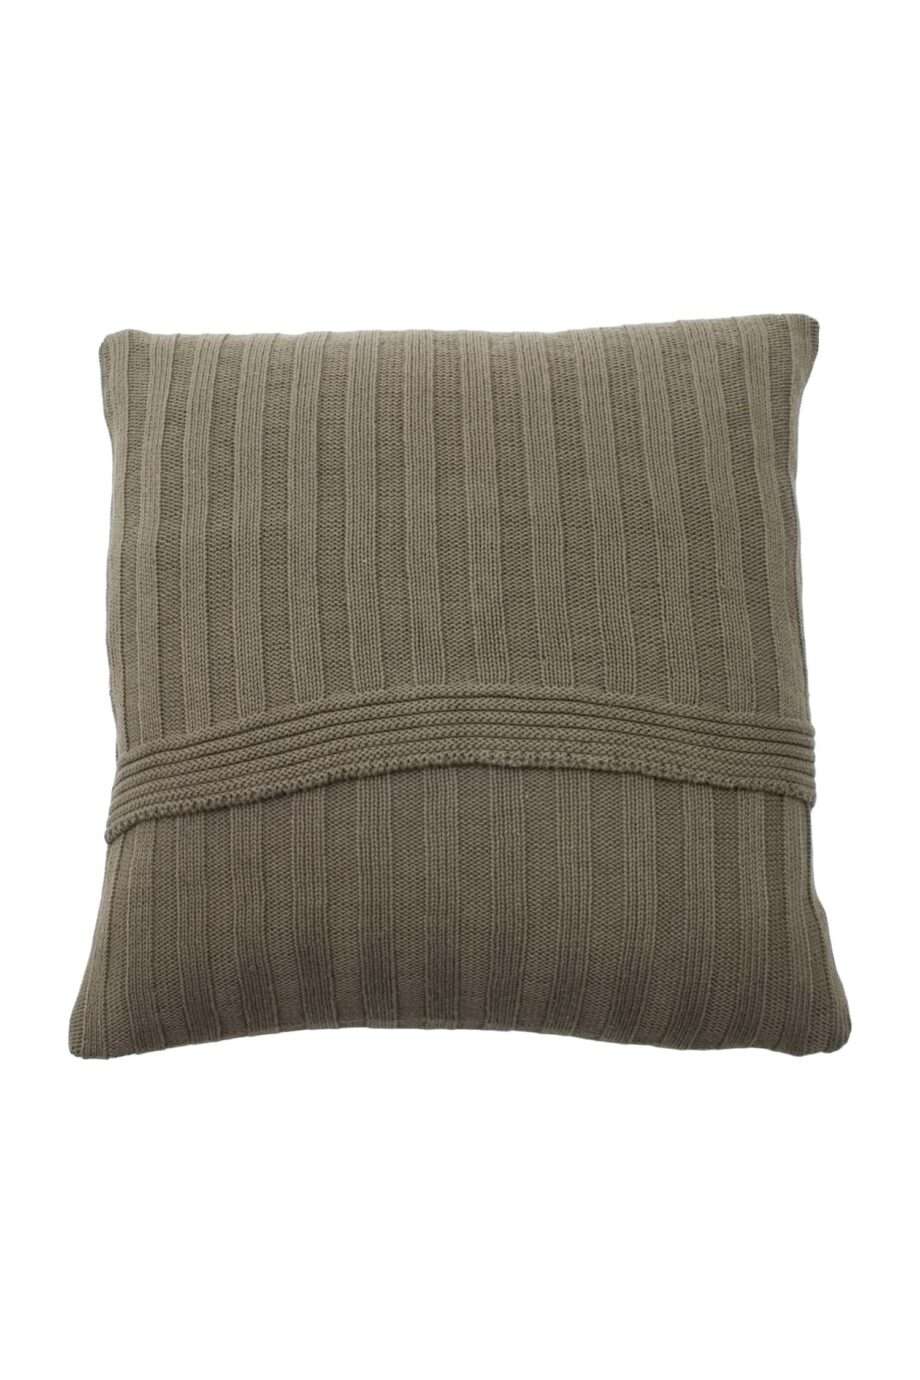 ribs olive green knitted cotton pillowcase medium